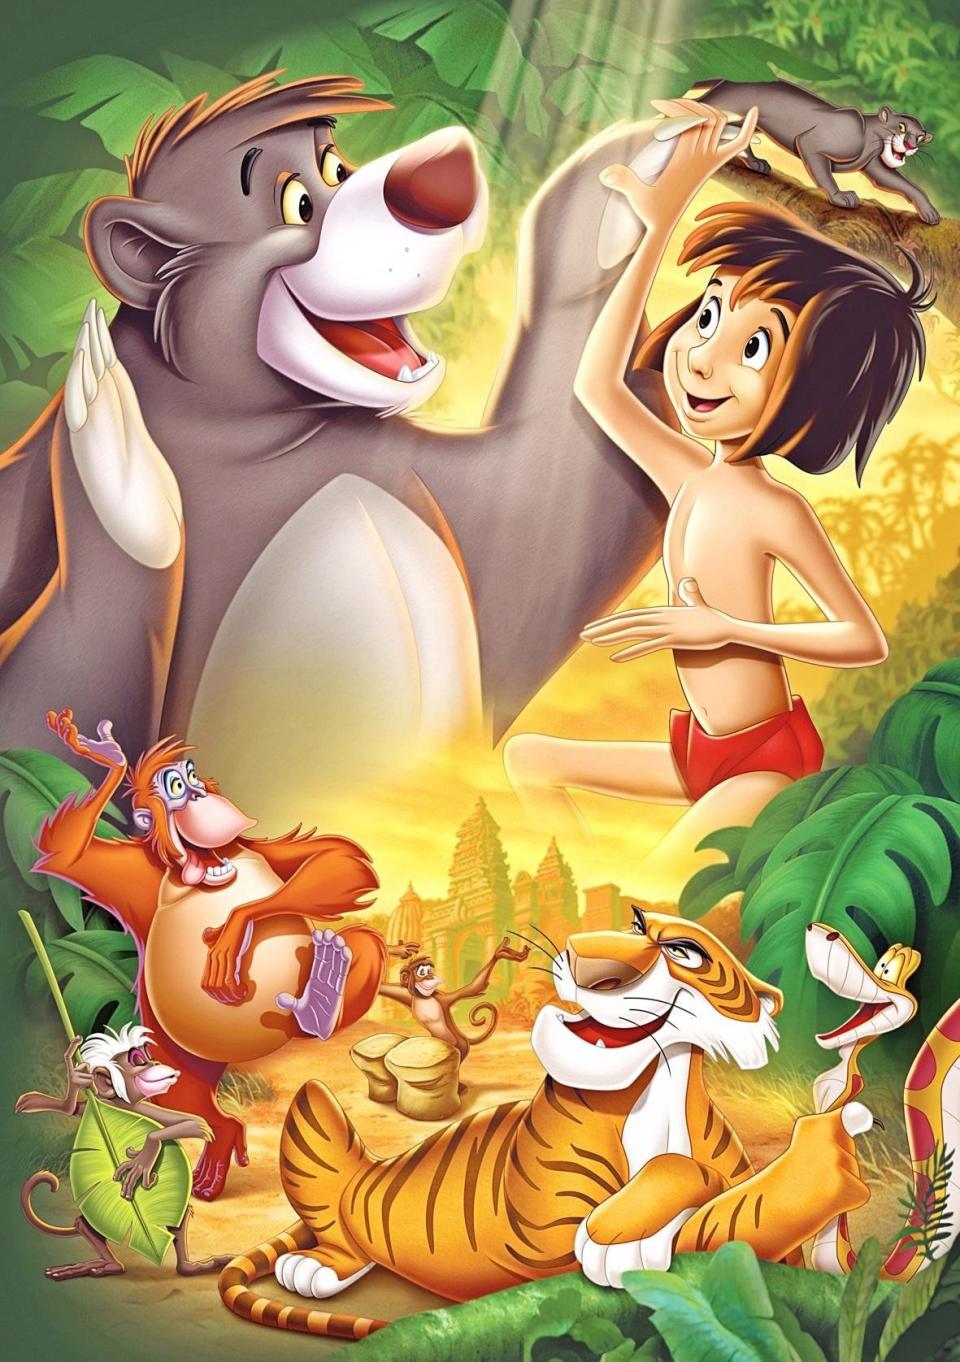 <p><a href="http://www.huffingtonpost.com/2014/08/02/bill-murray-jungle-book_n_5643931.html" target="_blank">Jon Favreau is directing this live-action rendition</a>&nbsp;of the 1967 classic, which is due out later this year. Bill Murray is Baloo,&nbsp;Christopher Walken is King Louie, Lupita Nyong&rsquo;o is Raksha, Ben Kingsley is Bagheera, Giancarlo Esposito is Akela, Scarlett Johansson is Kaa, Idris Elba is Shere Khan and Neel Sethi is Mowlgi.</p>